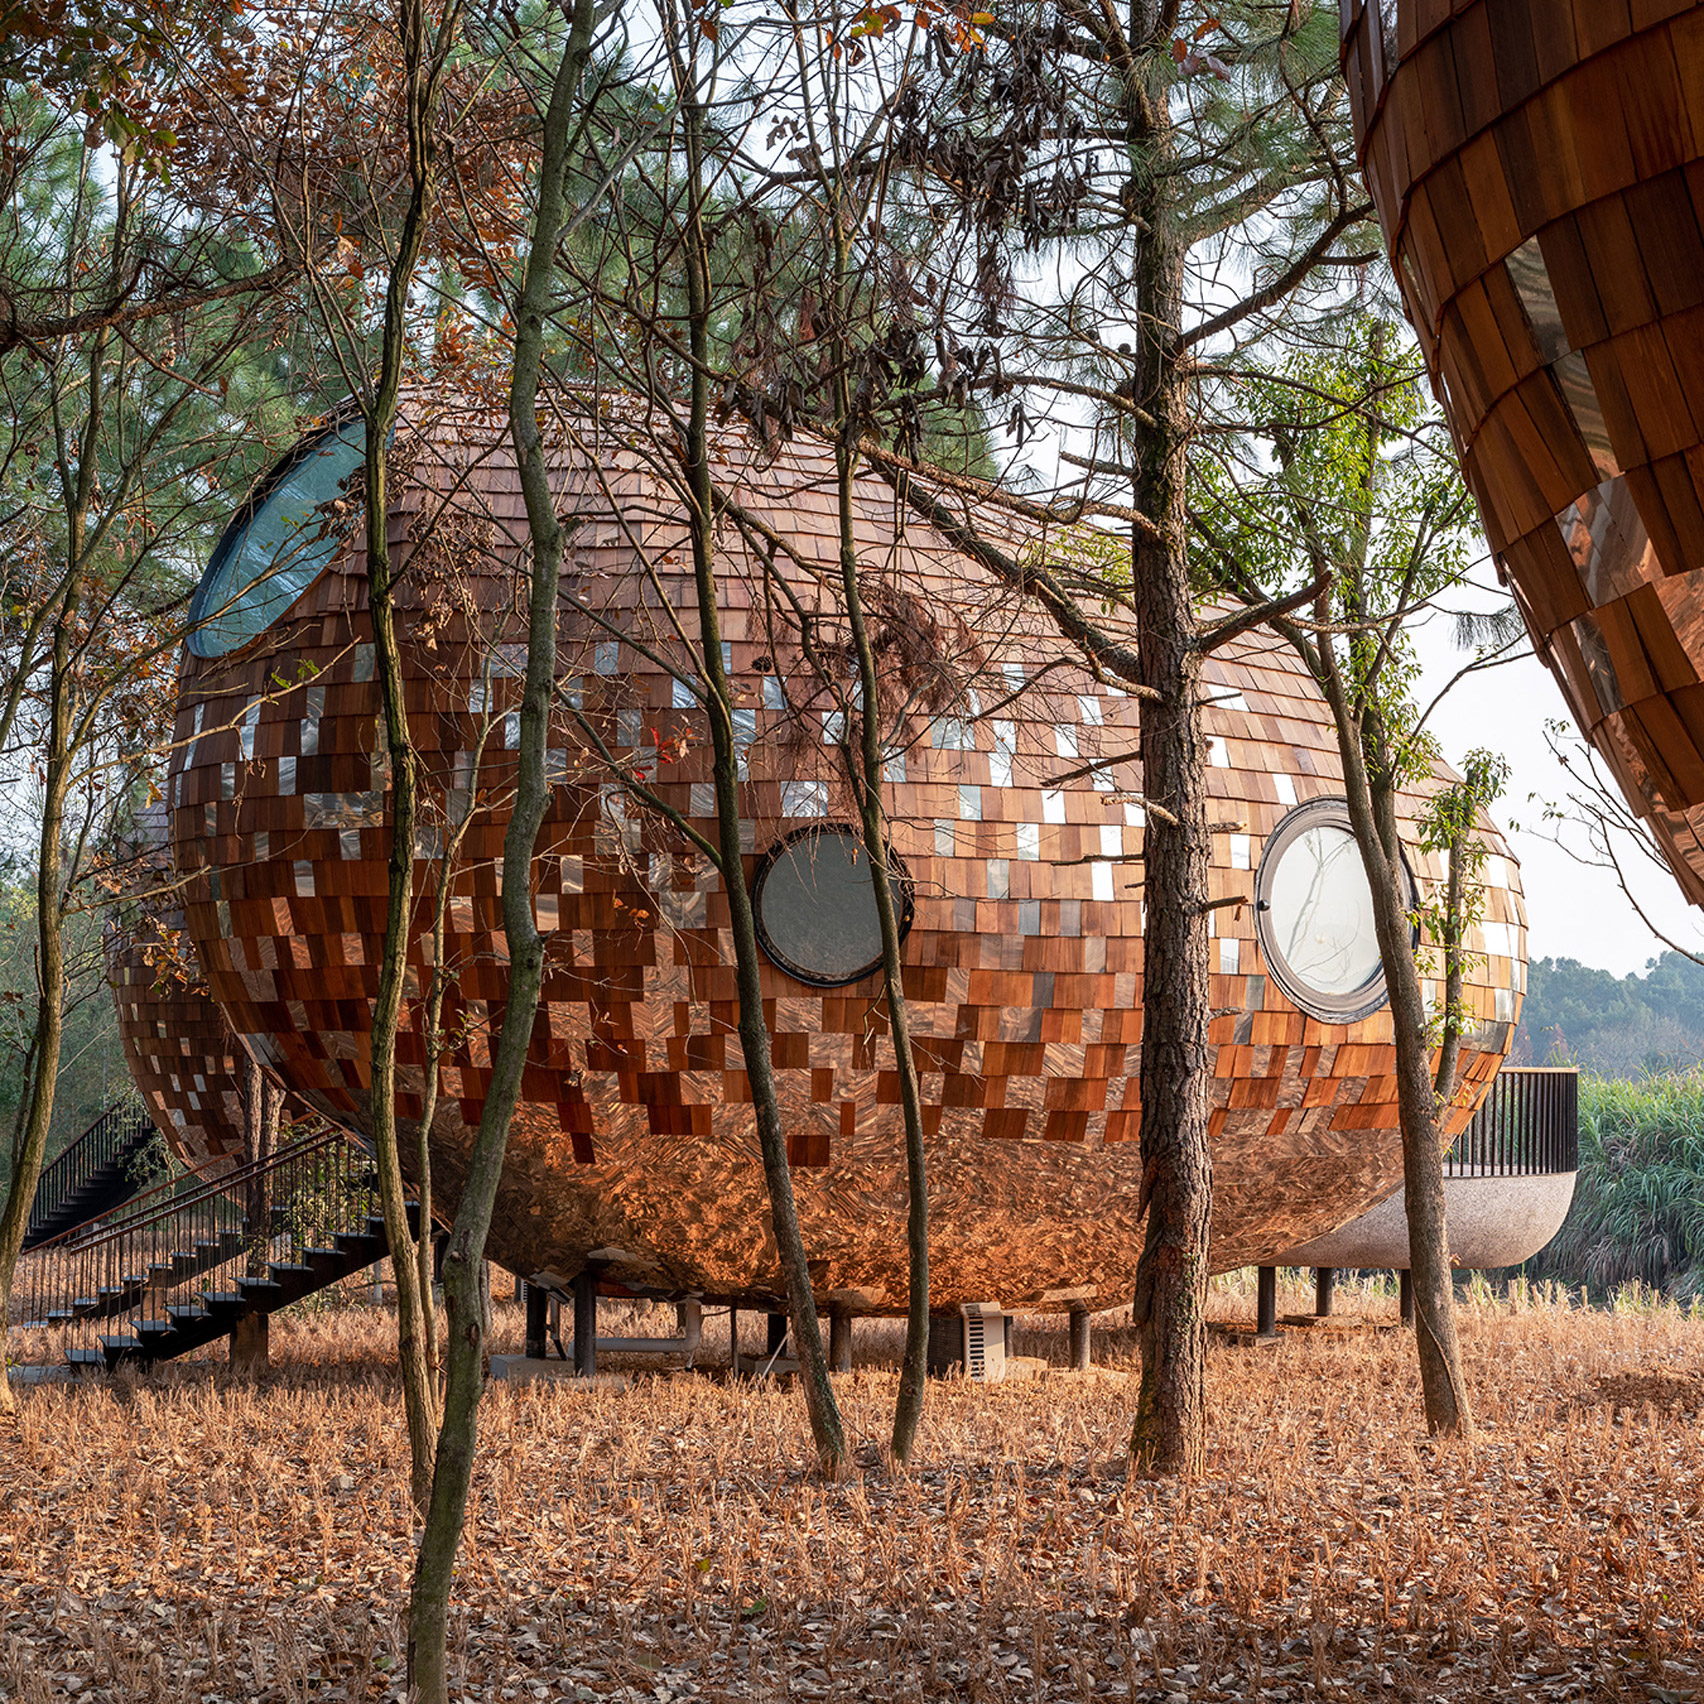 A wooden holiday cabin in China